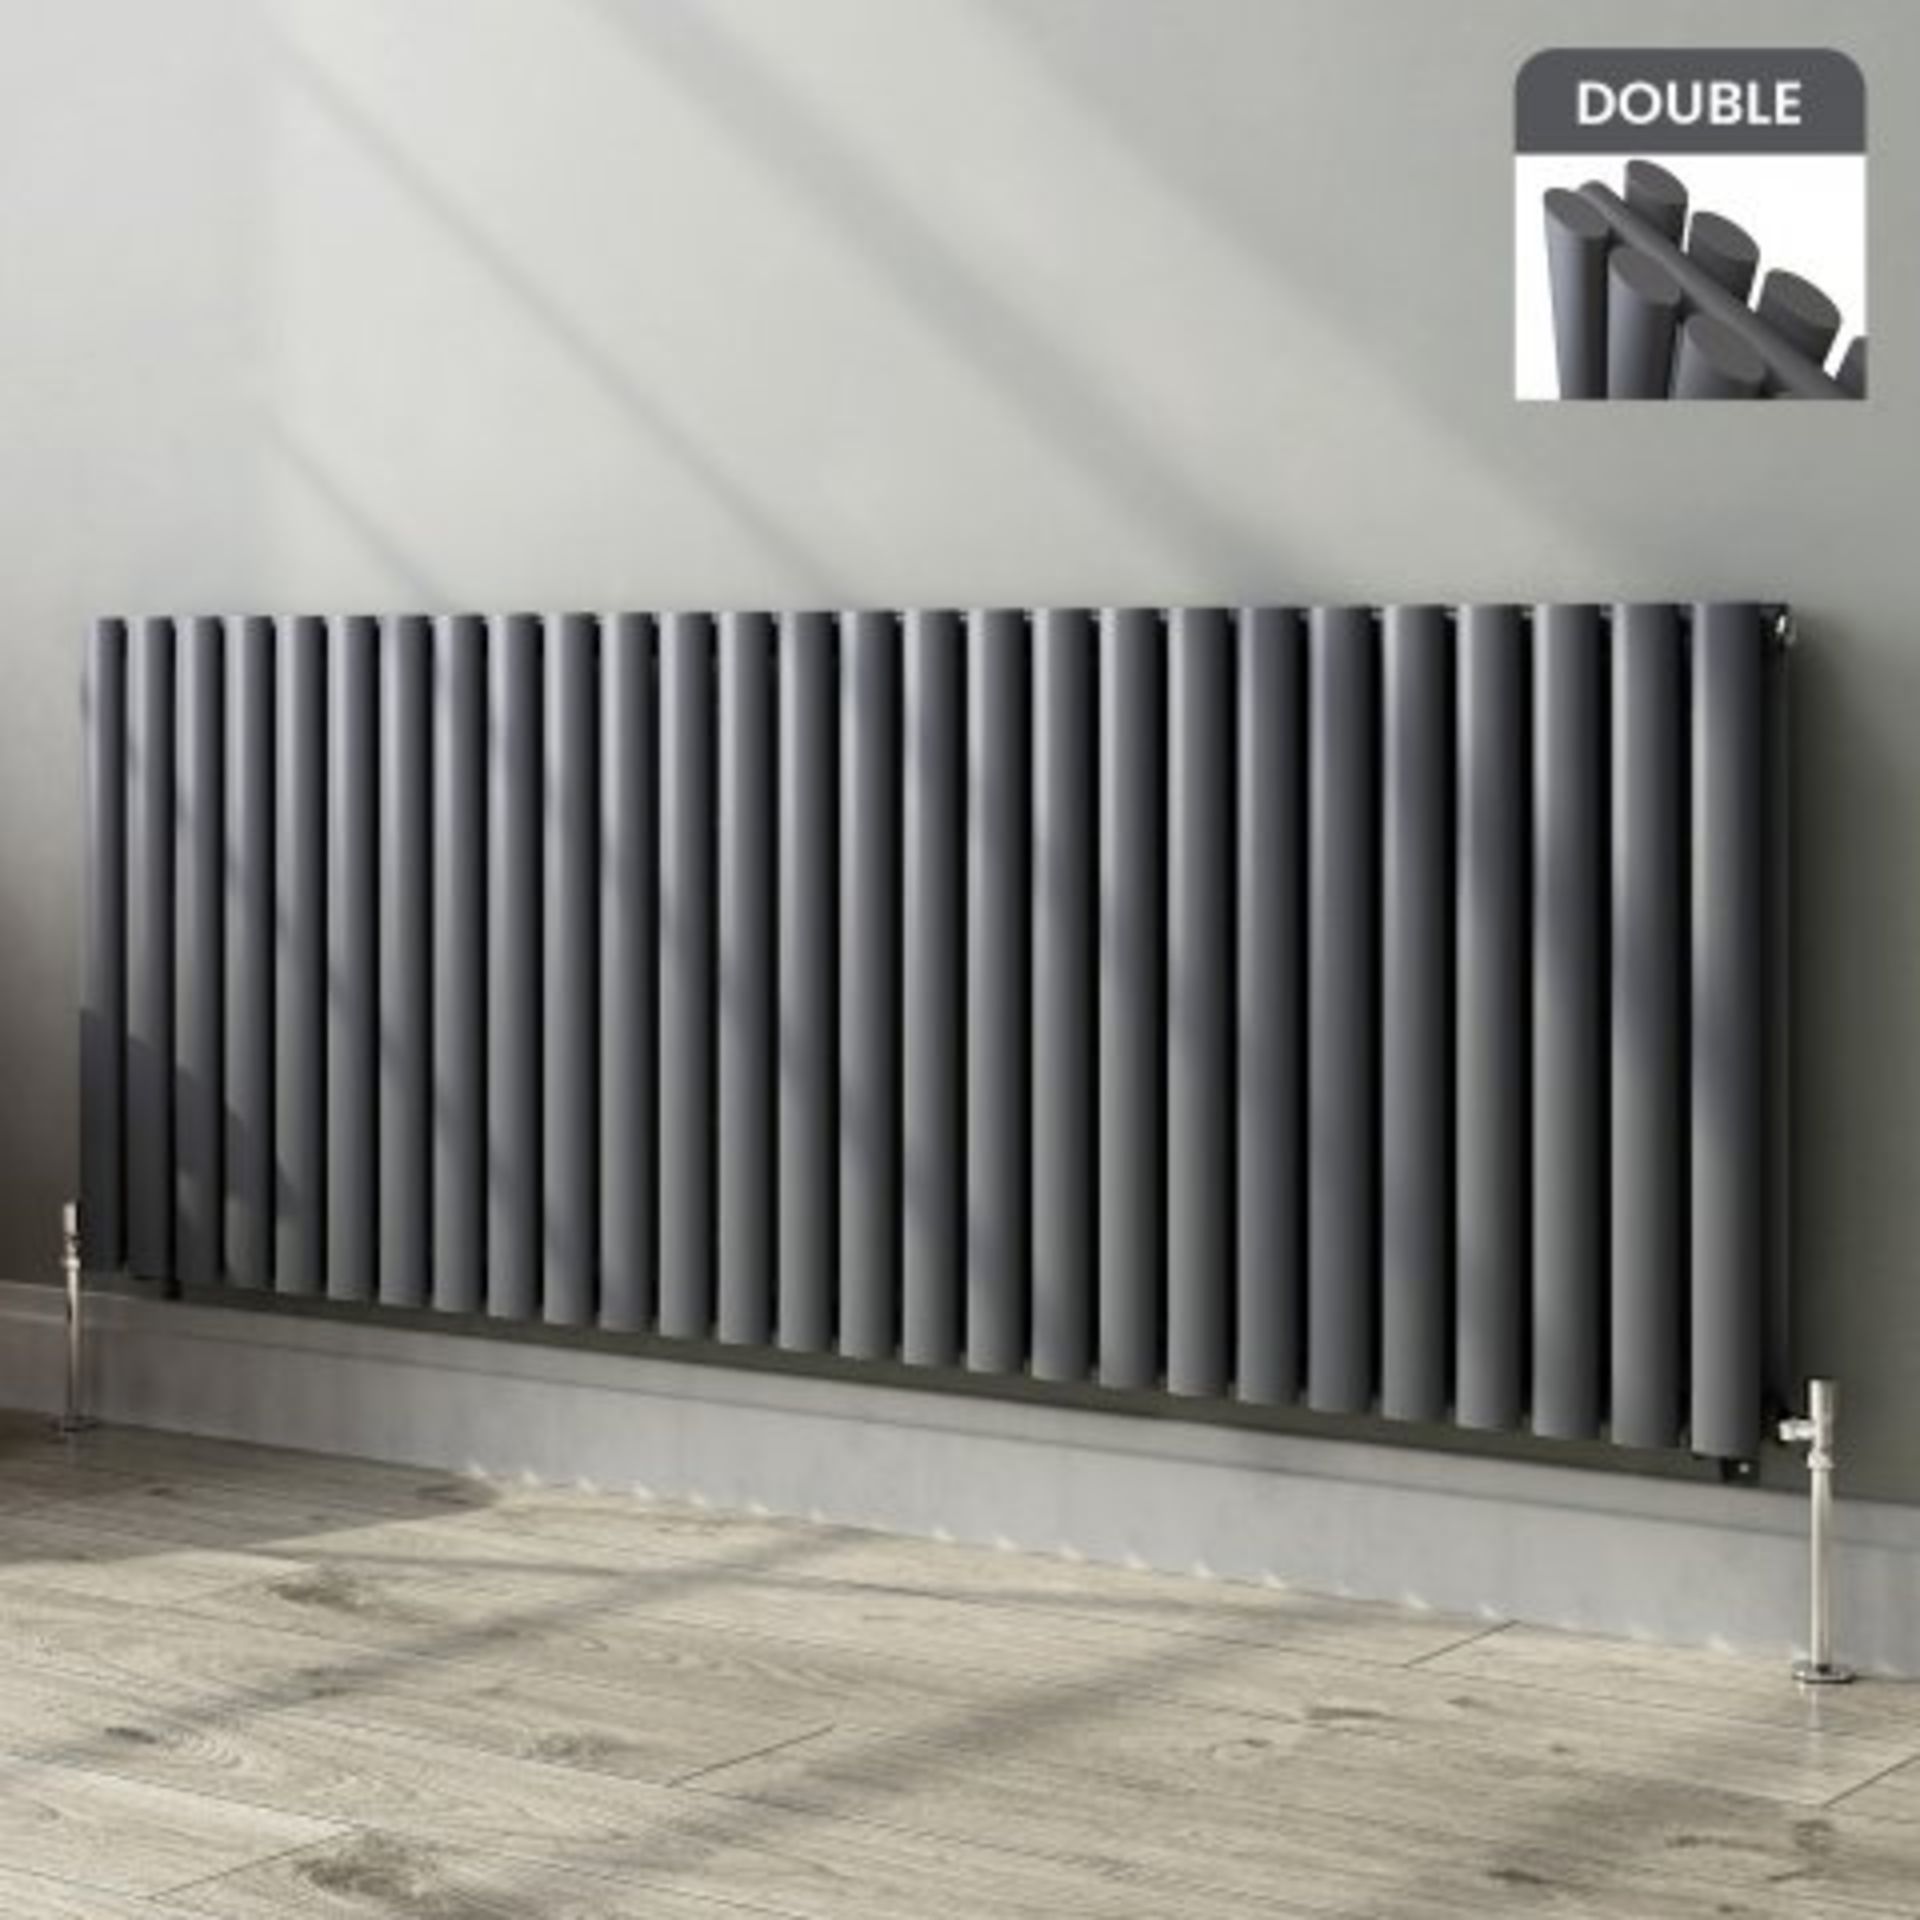 (H9) : 600x1620mm Anthracite Double Panel Oval Tube Horizontal Radiator - Huntington Finest. RRP £